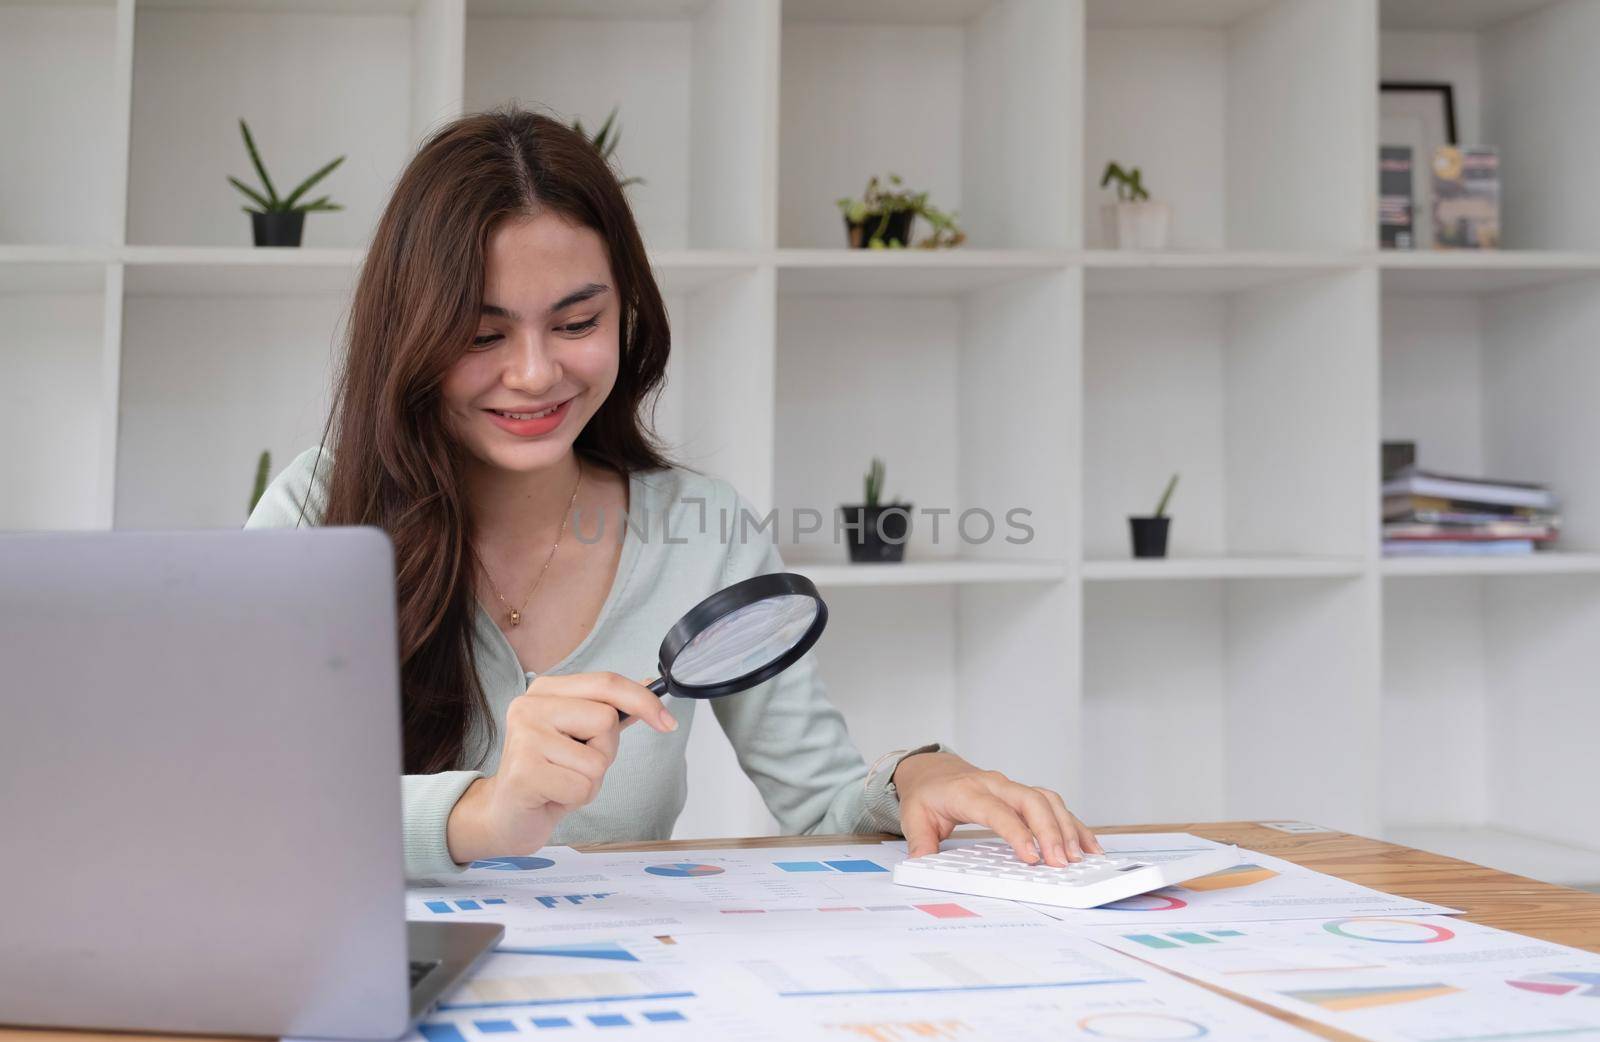 Tax inspector and financial auditor looking through magnifying glass, inspecting company financial papers, documents and reports by wichayada